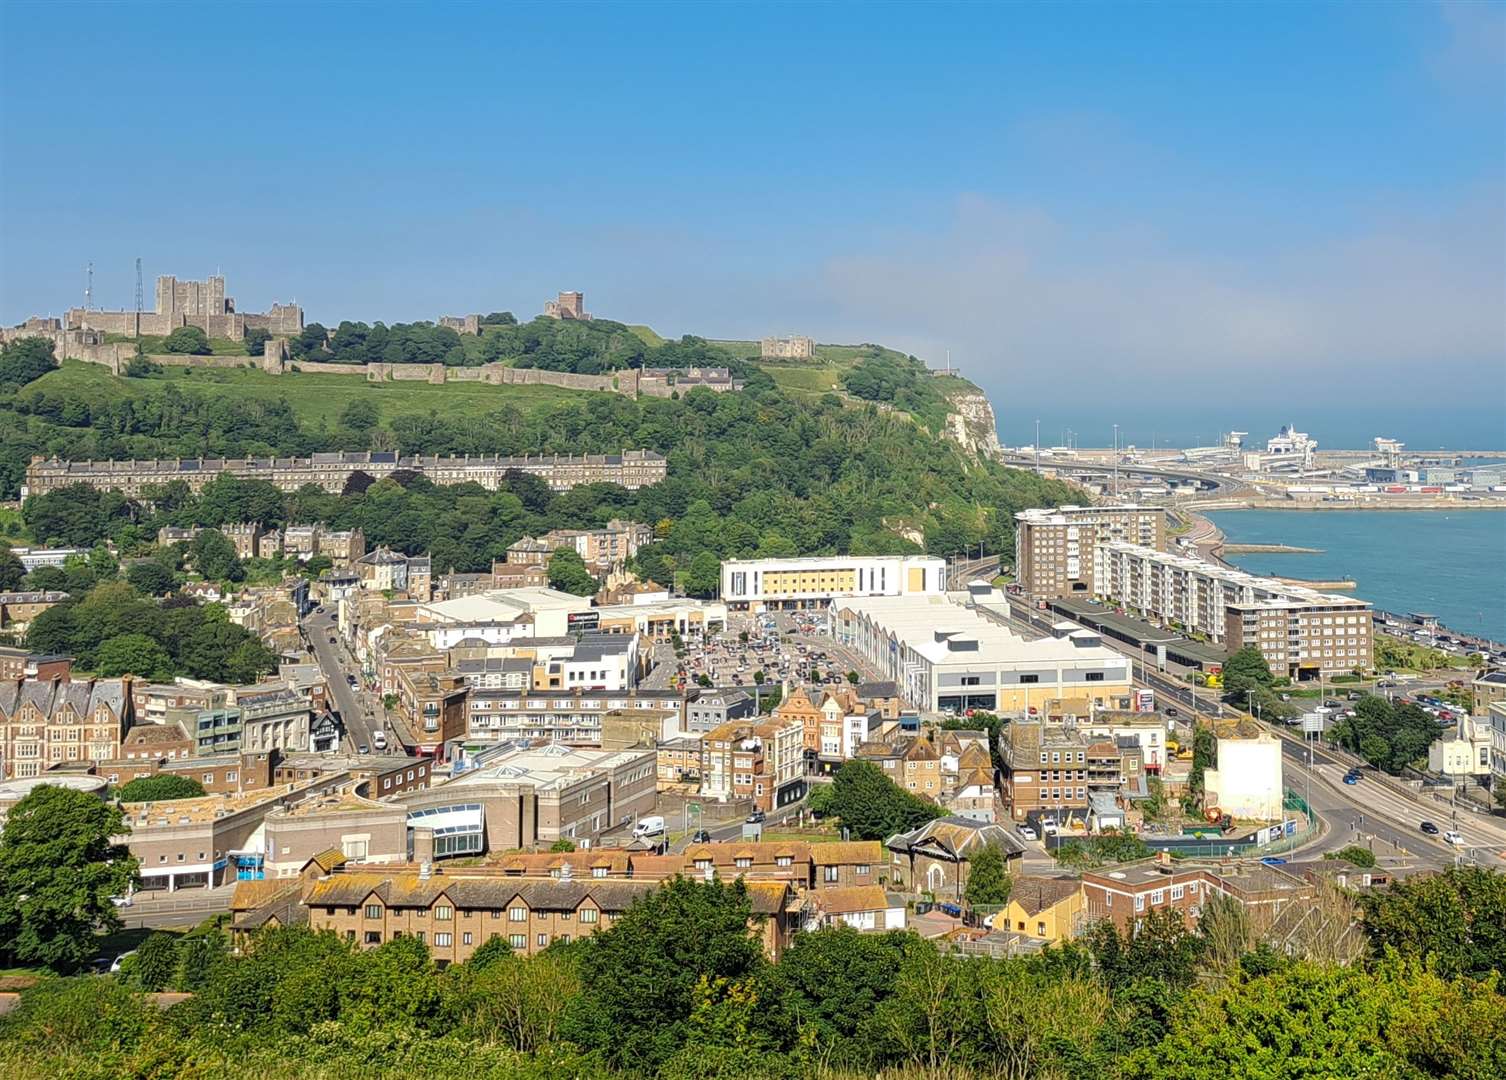 Dover town centre from the Western Heights. The St James' shopping centre is most obviously in view plus the whitewashed Banksy Brexit building